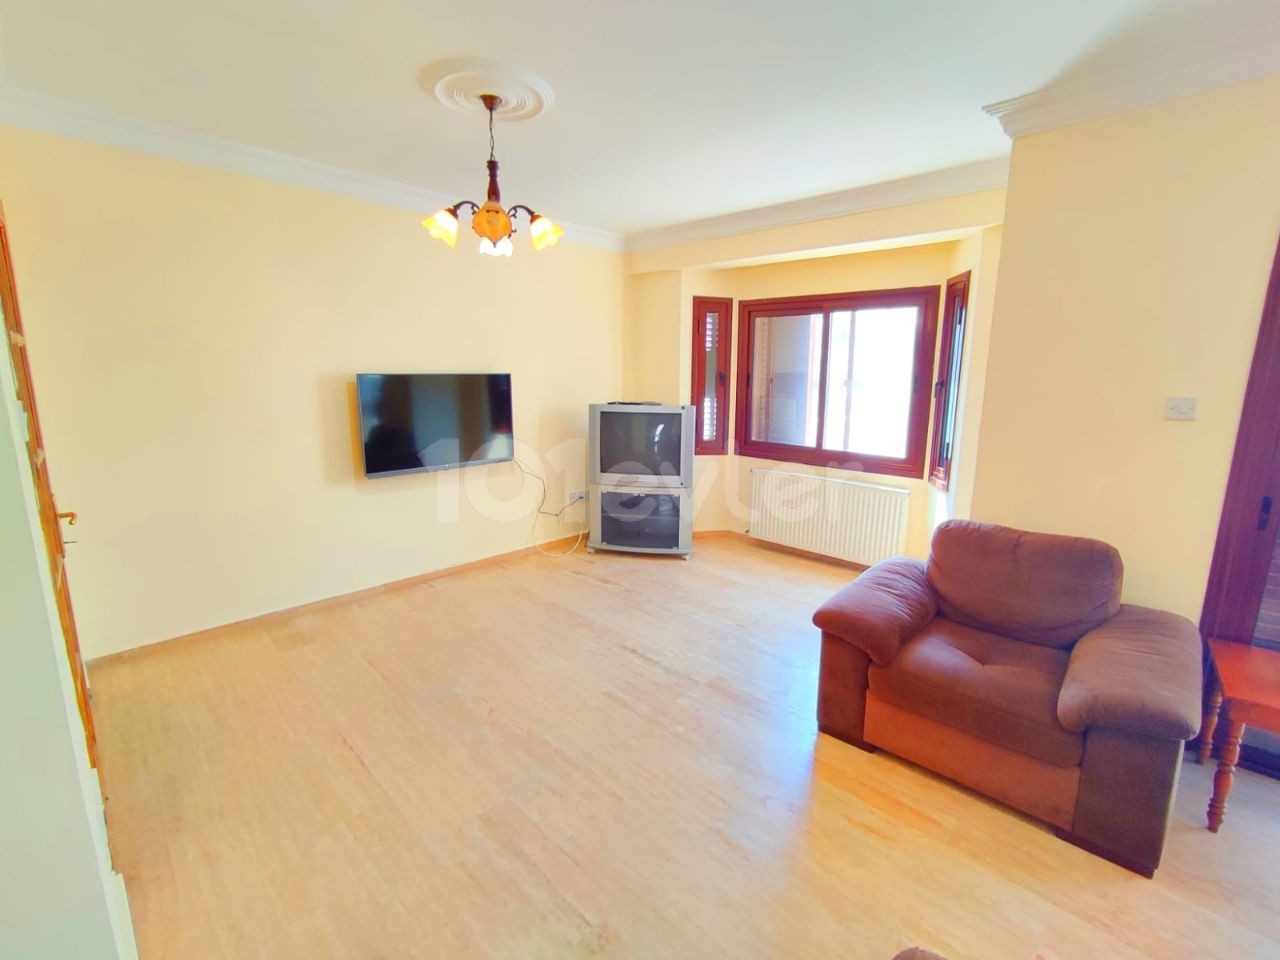 3 Bedroom Furnished Apartment in Kashgar in the Center of Kyrenia ** 